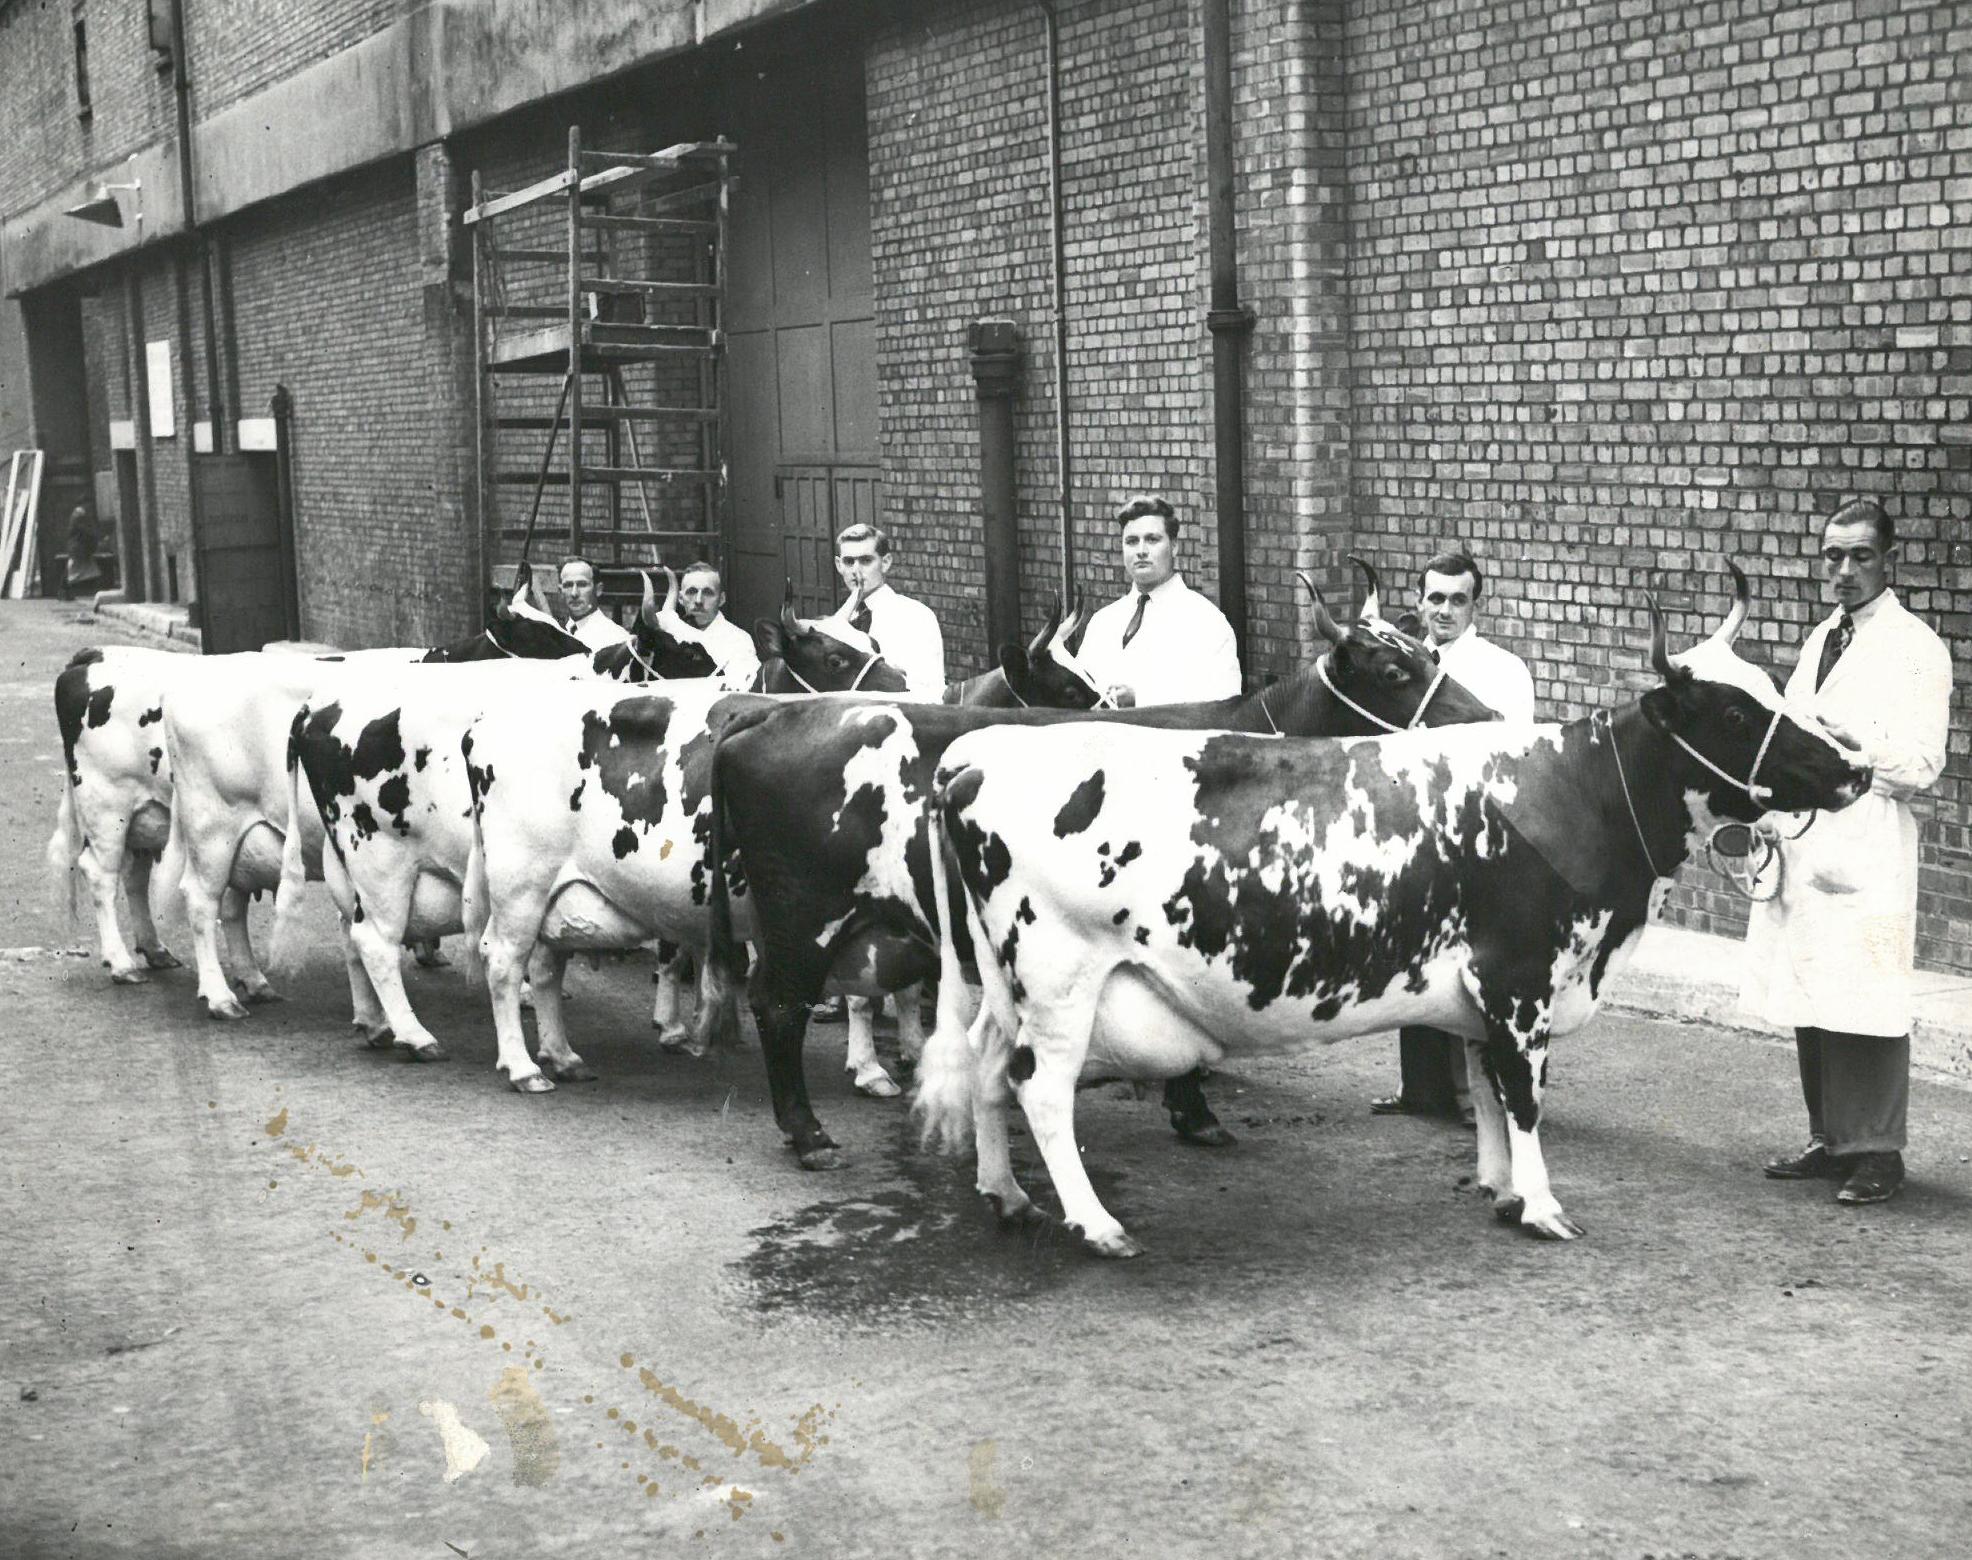 Group of Ayrshire cows 1955